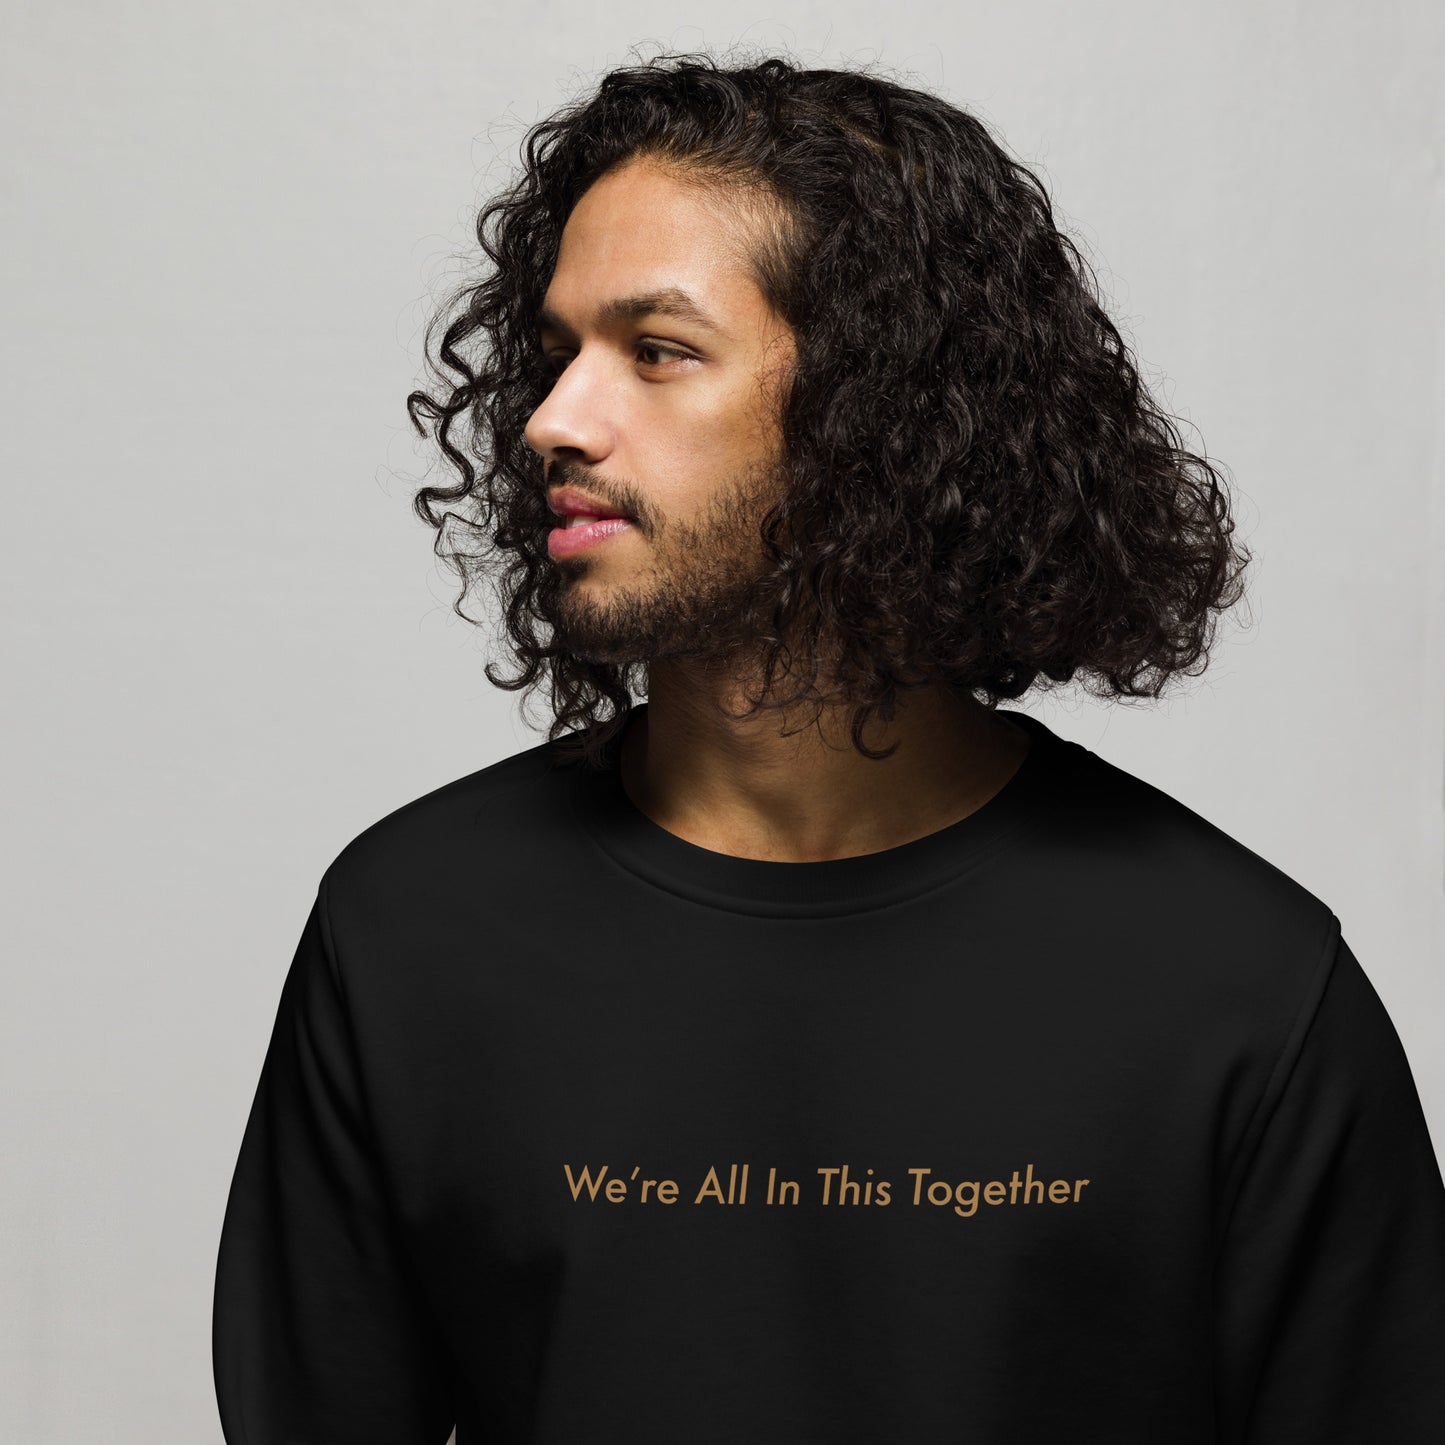 We're All In This Together Men's Organic Cotton Sweatshirt